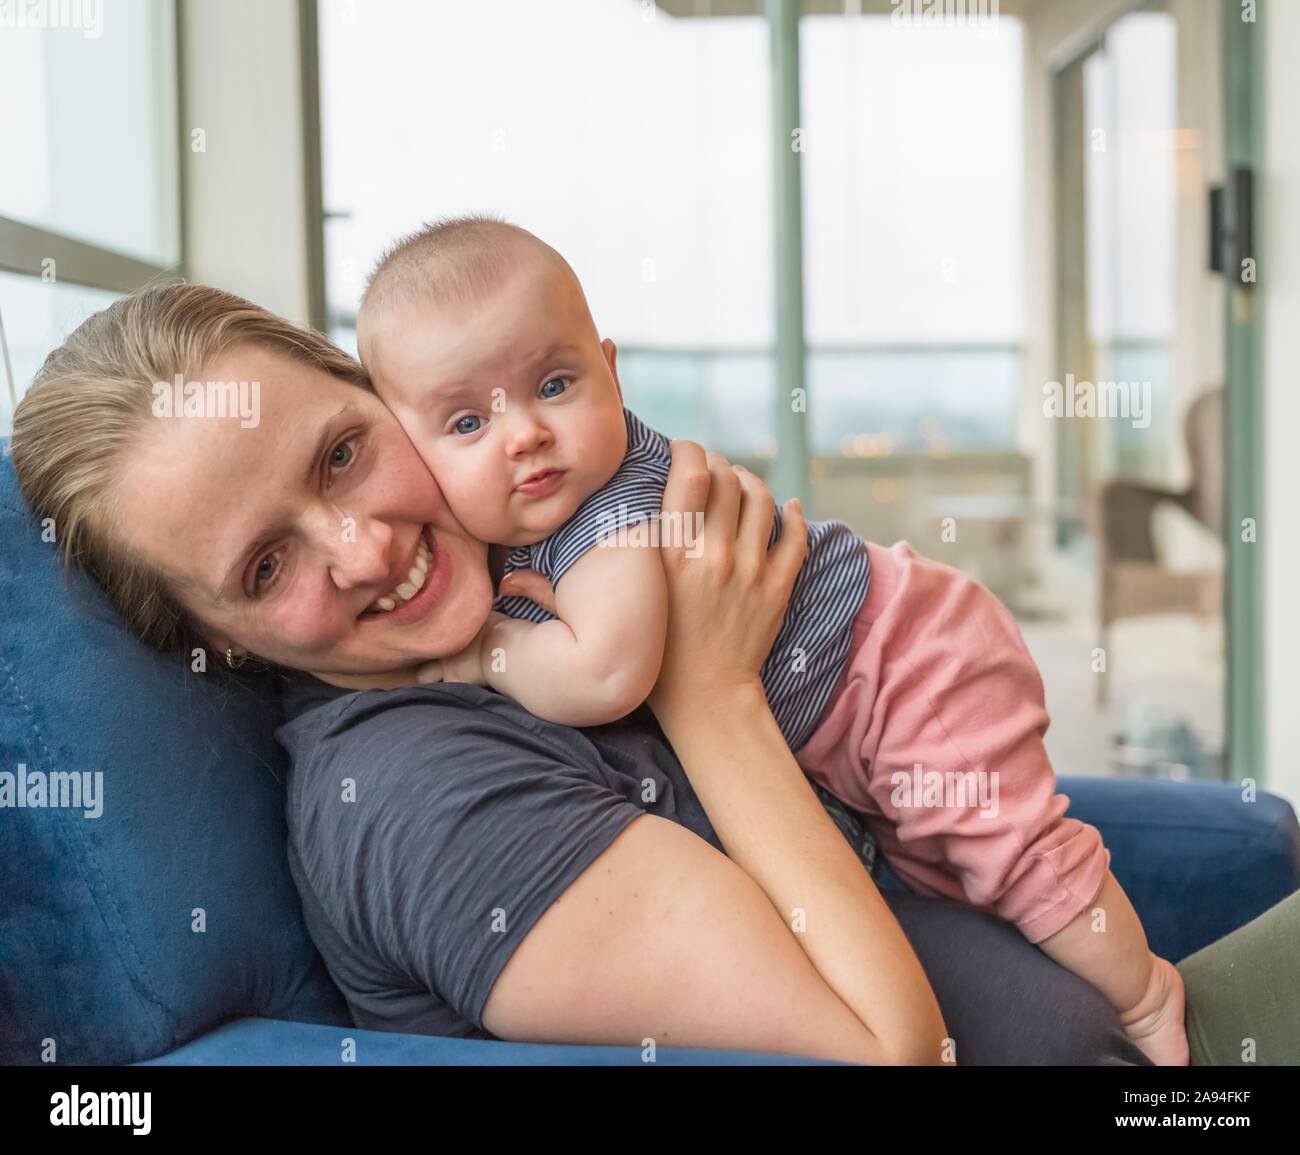 Portrait of infant baby girl with mother at home; Vancouver, British Columbia, Canada Stock Photo